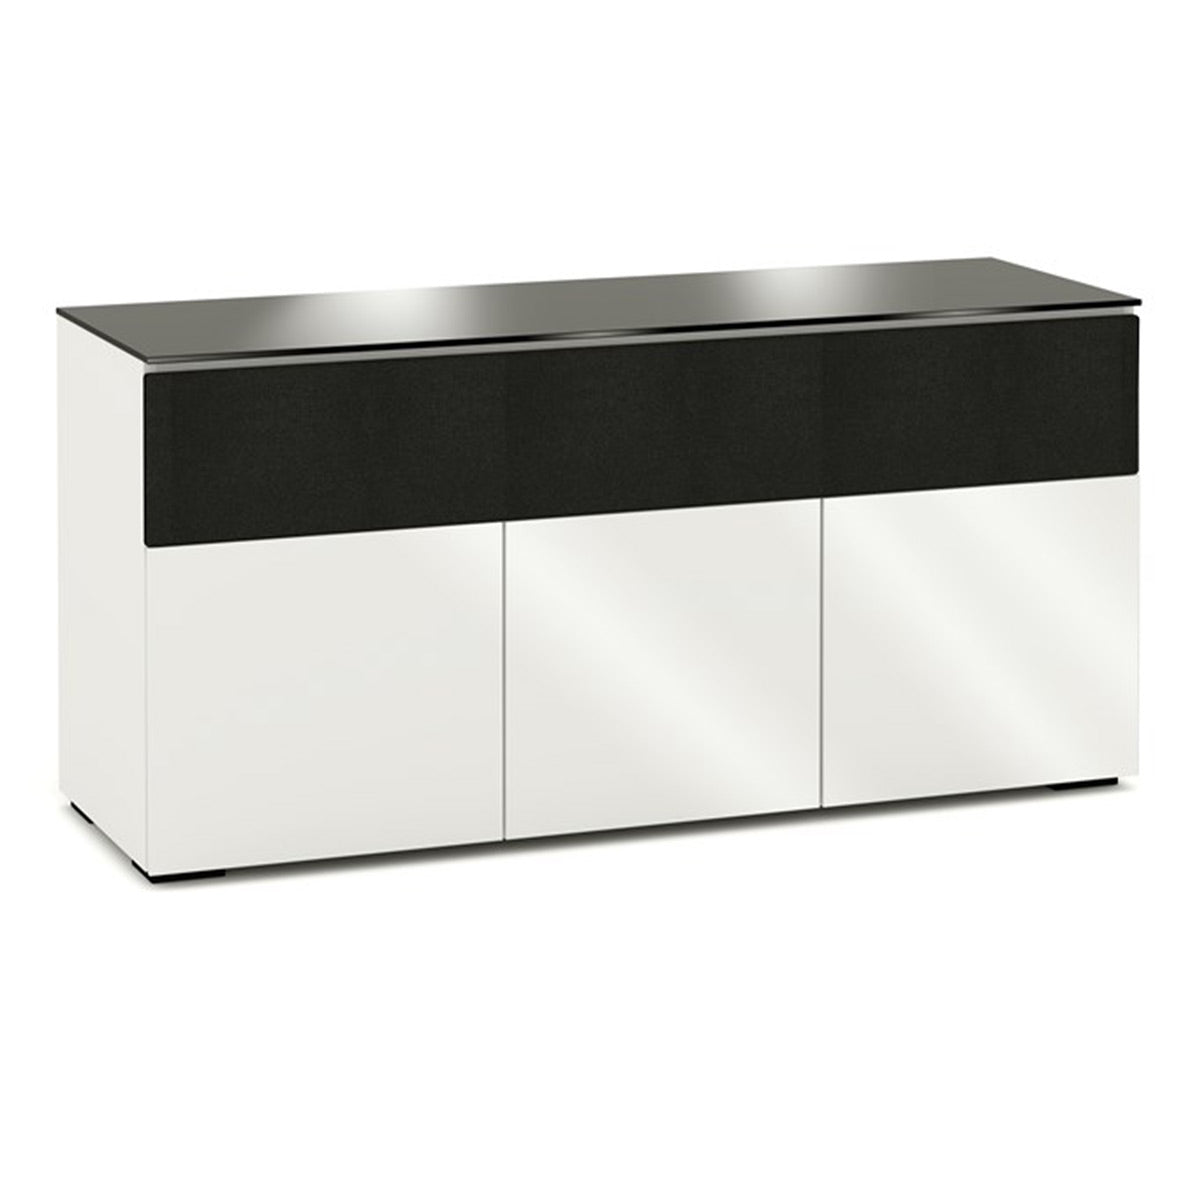 Salamander Chameleon Collection Miami 339 Speaker Integrated Cabinet (Gloss White with Black Glass Top)